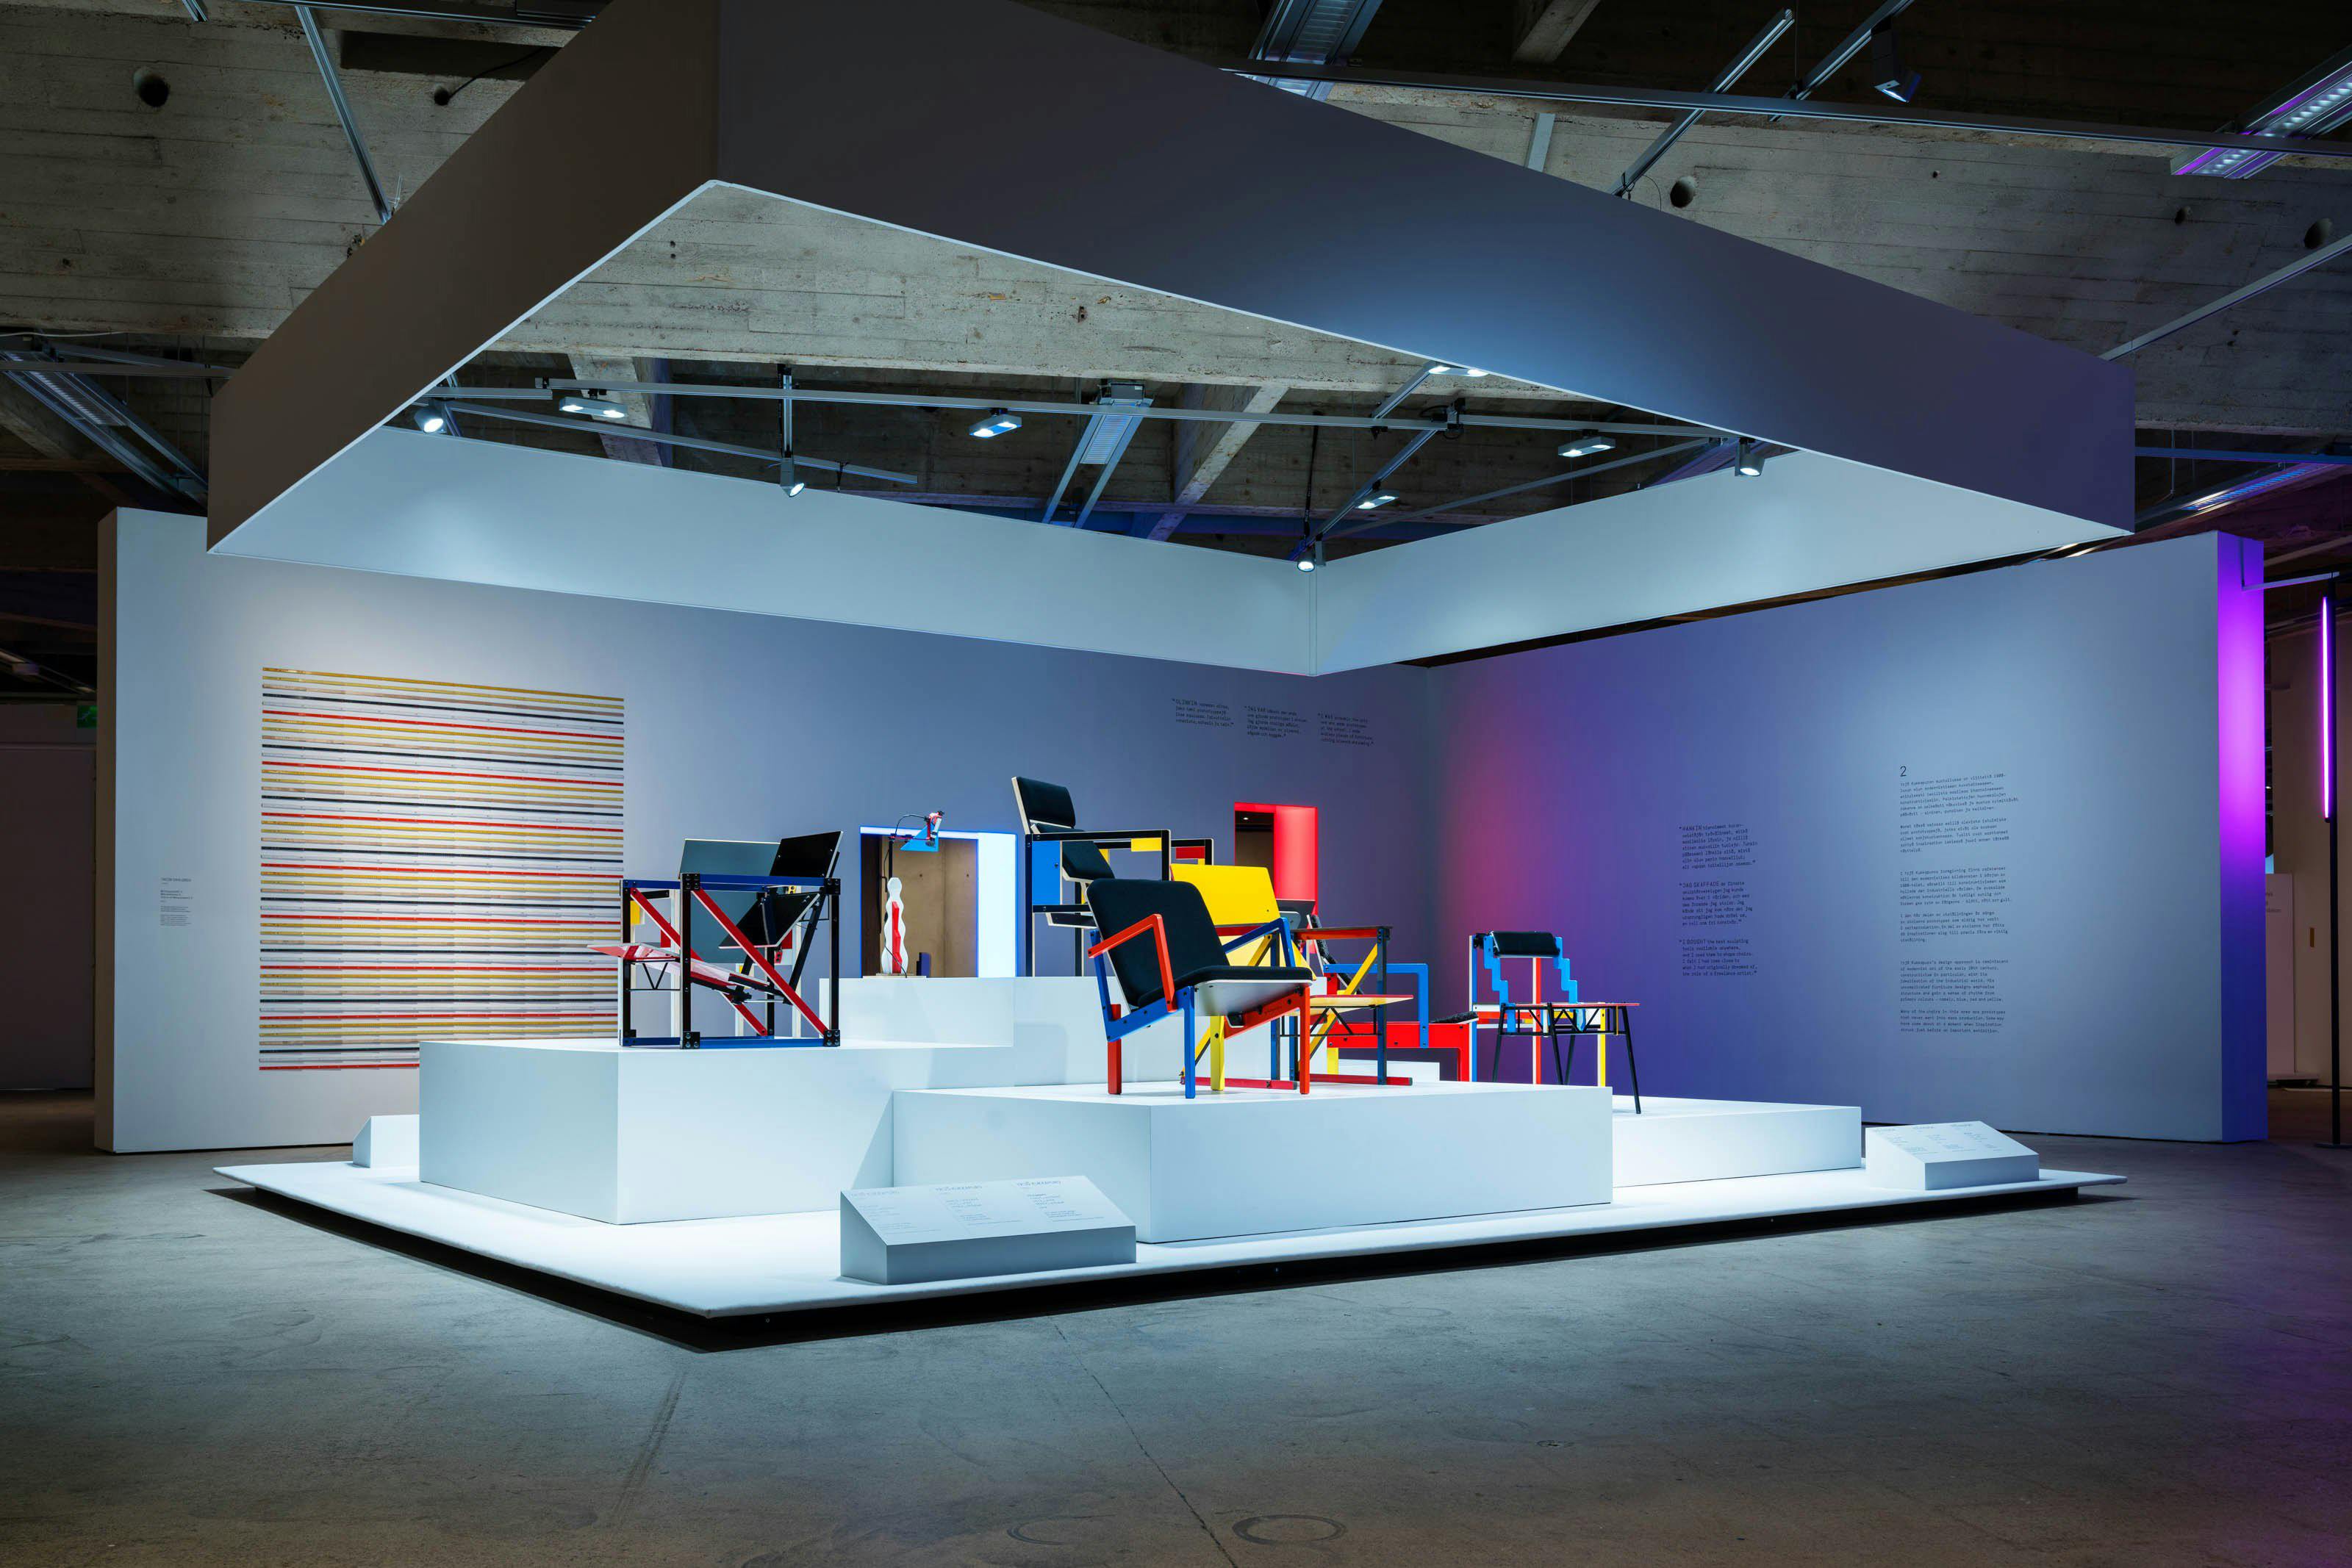 An installation view of a work by Jacob Dahlgren and a plinth with modernist style chairs